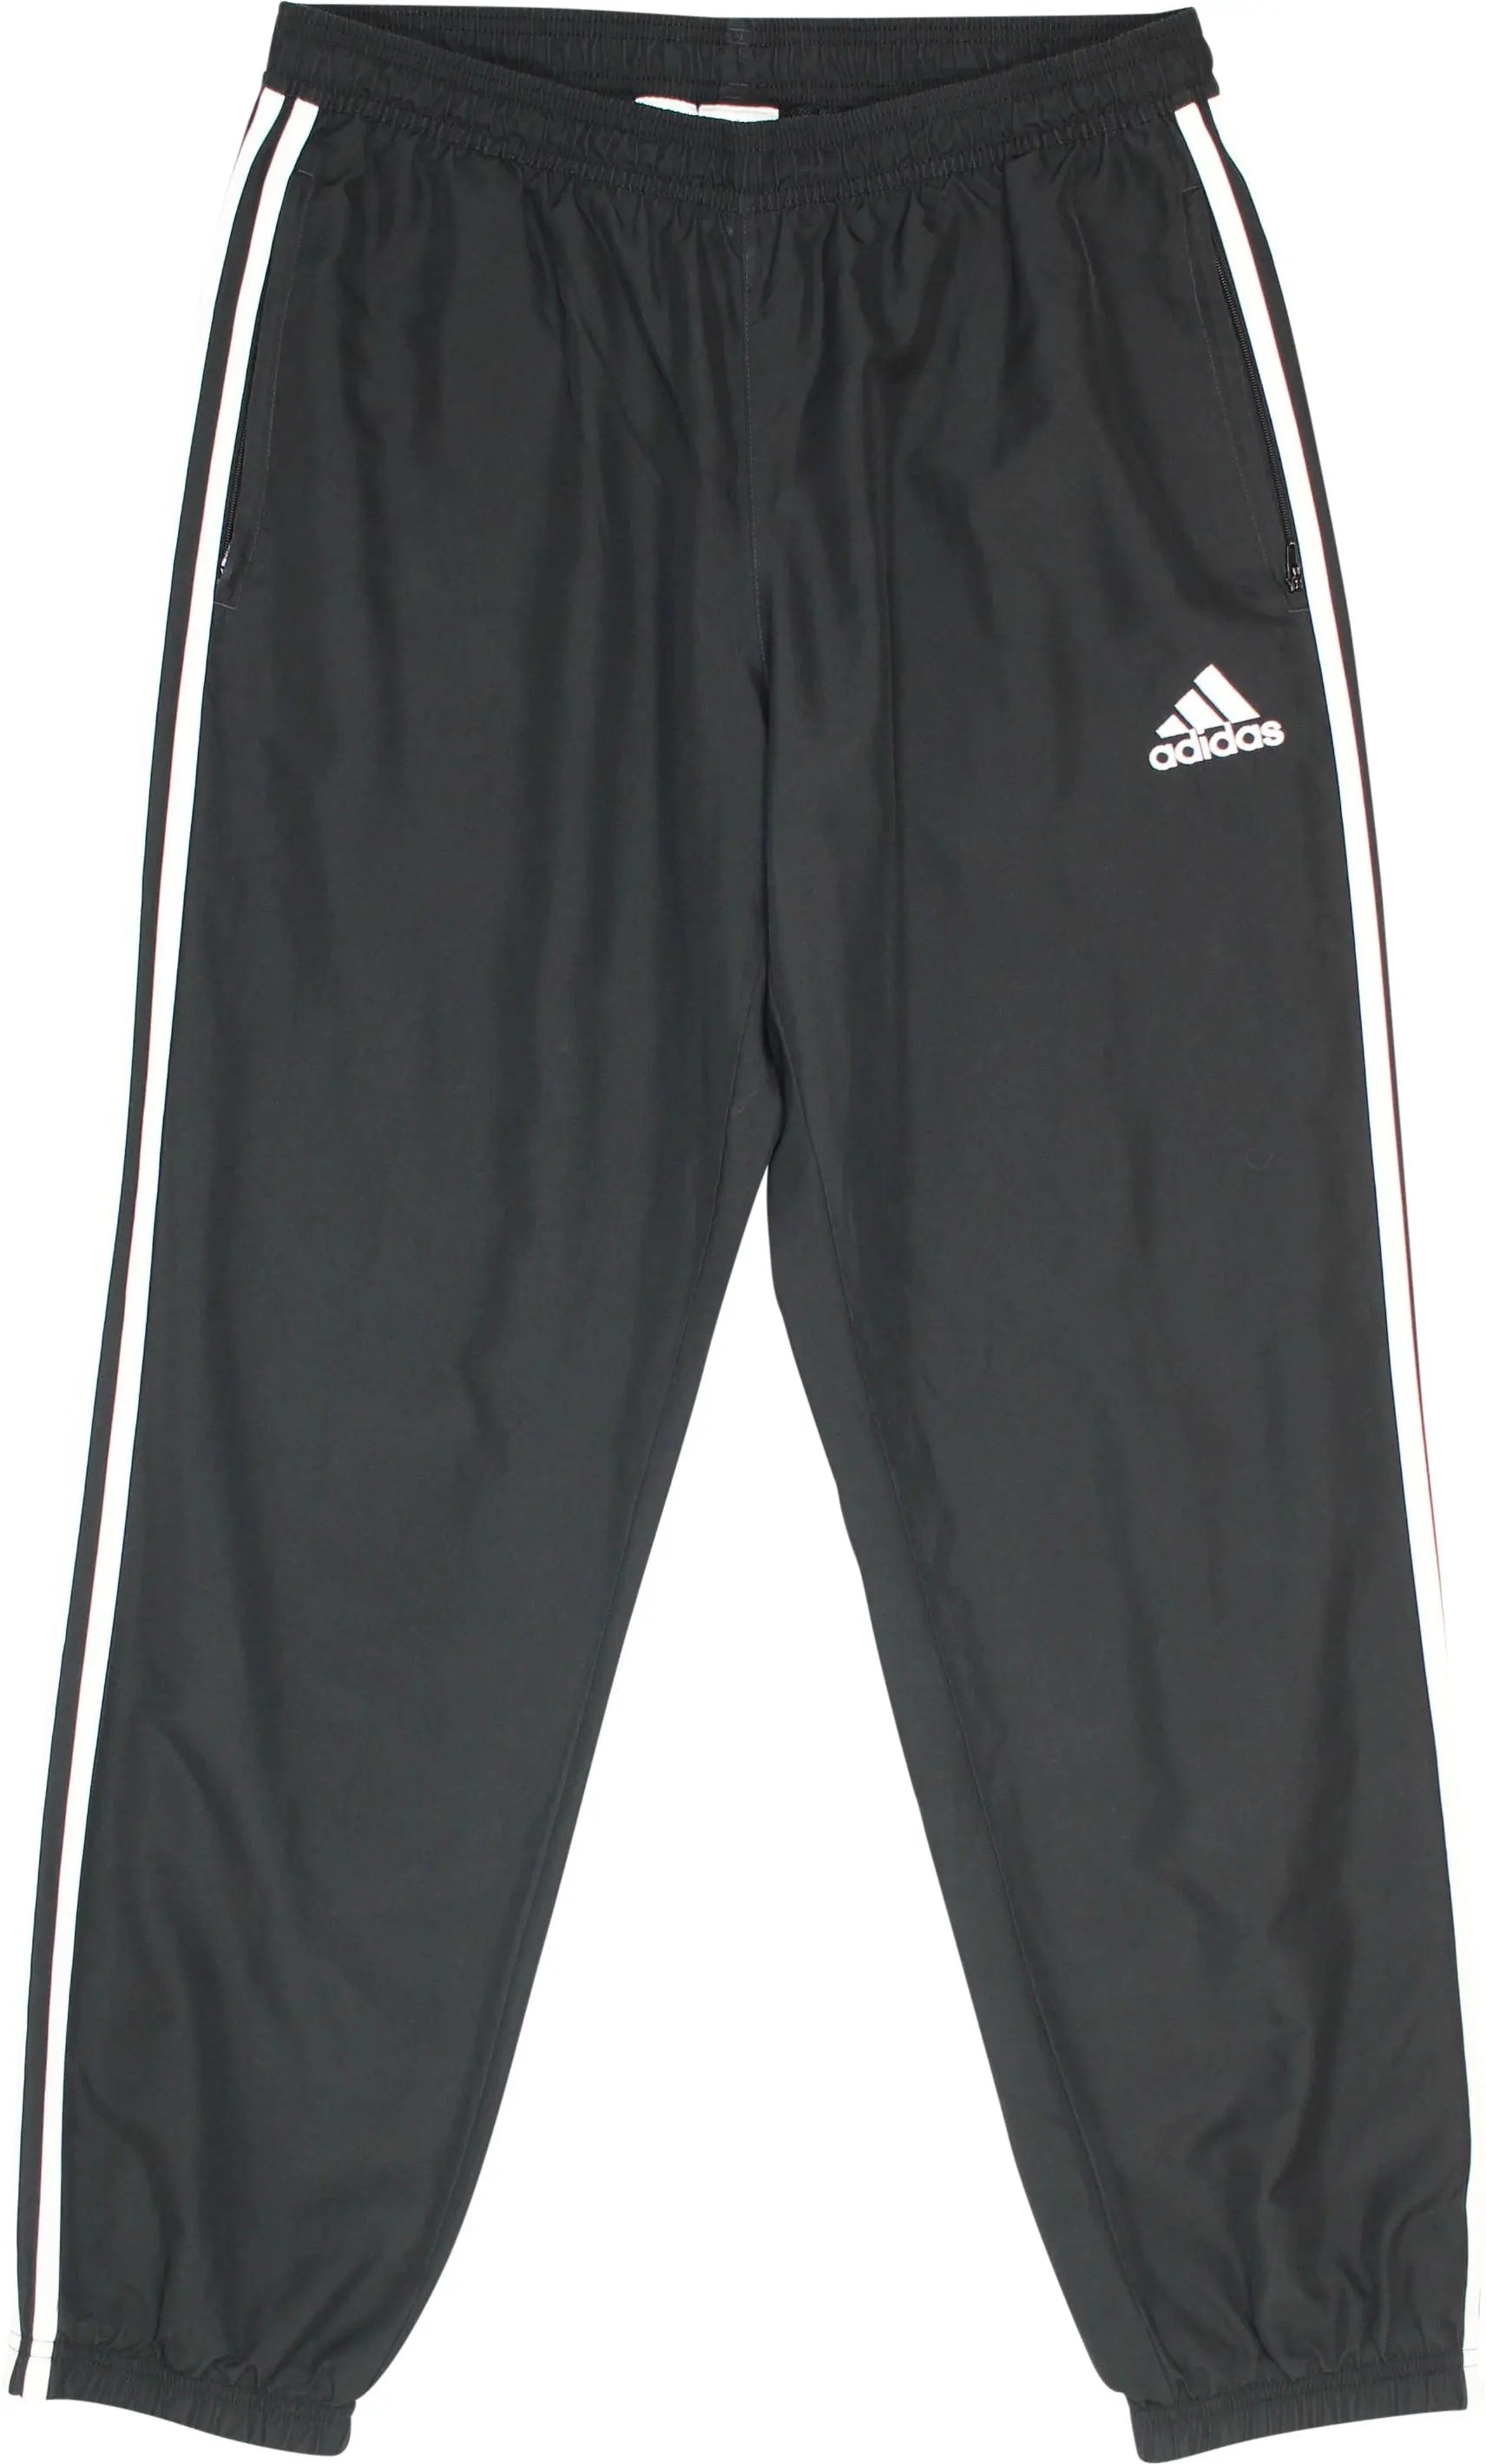 Adidas - 90s adidas track pants- ThriftTale.com - Vintage and second handclothing